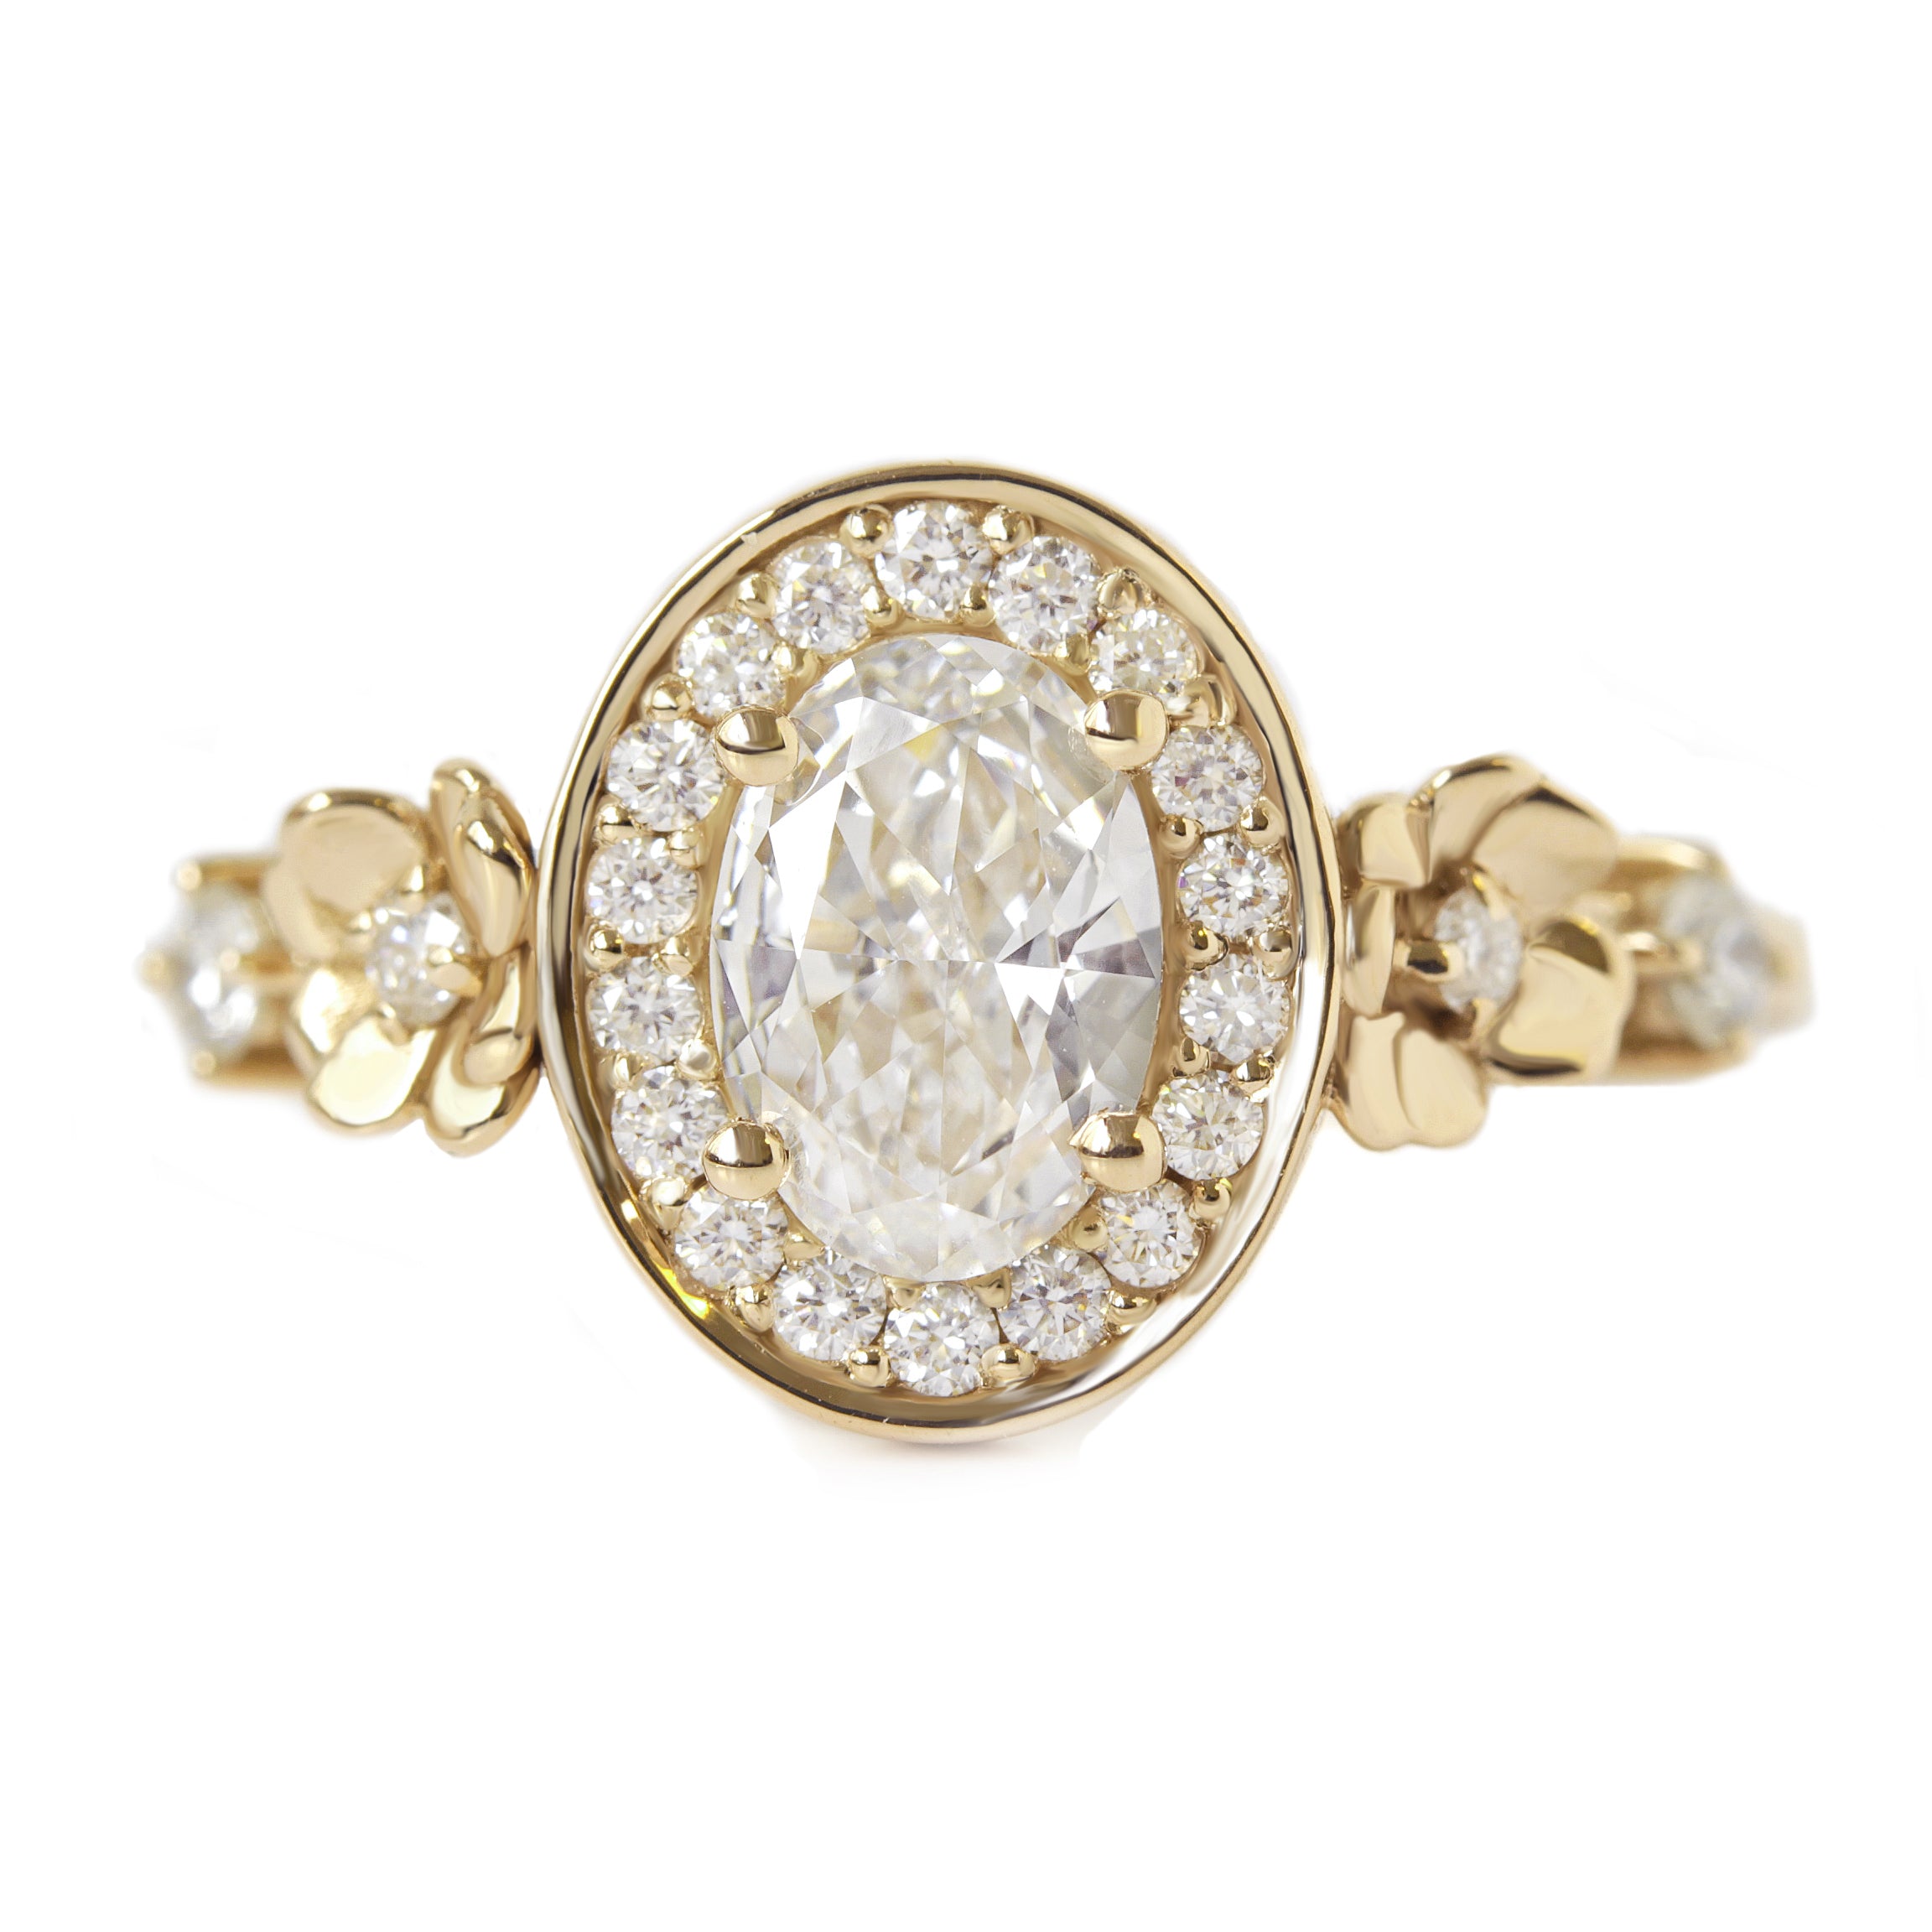 Oval Halo Diamond Floral Engagement Ring - "Antheia" ♥